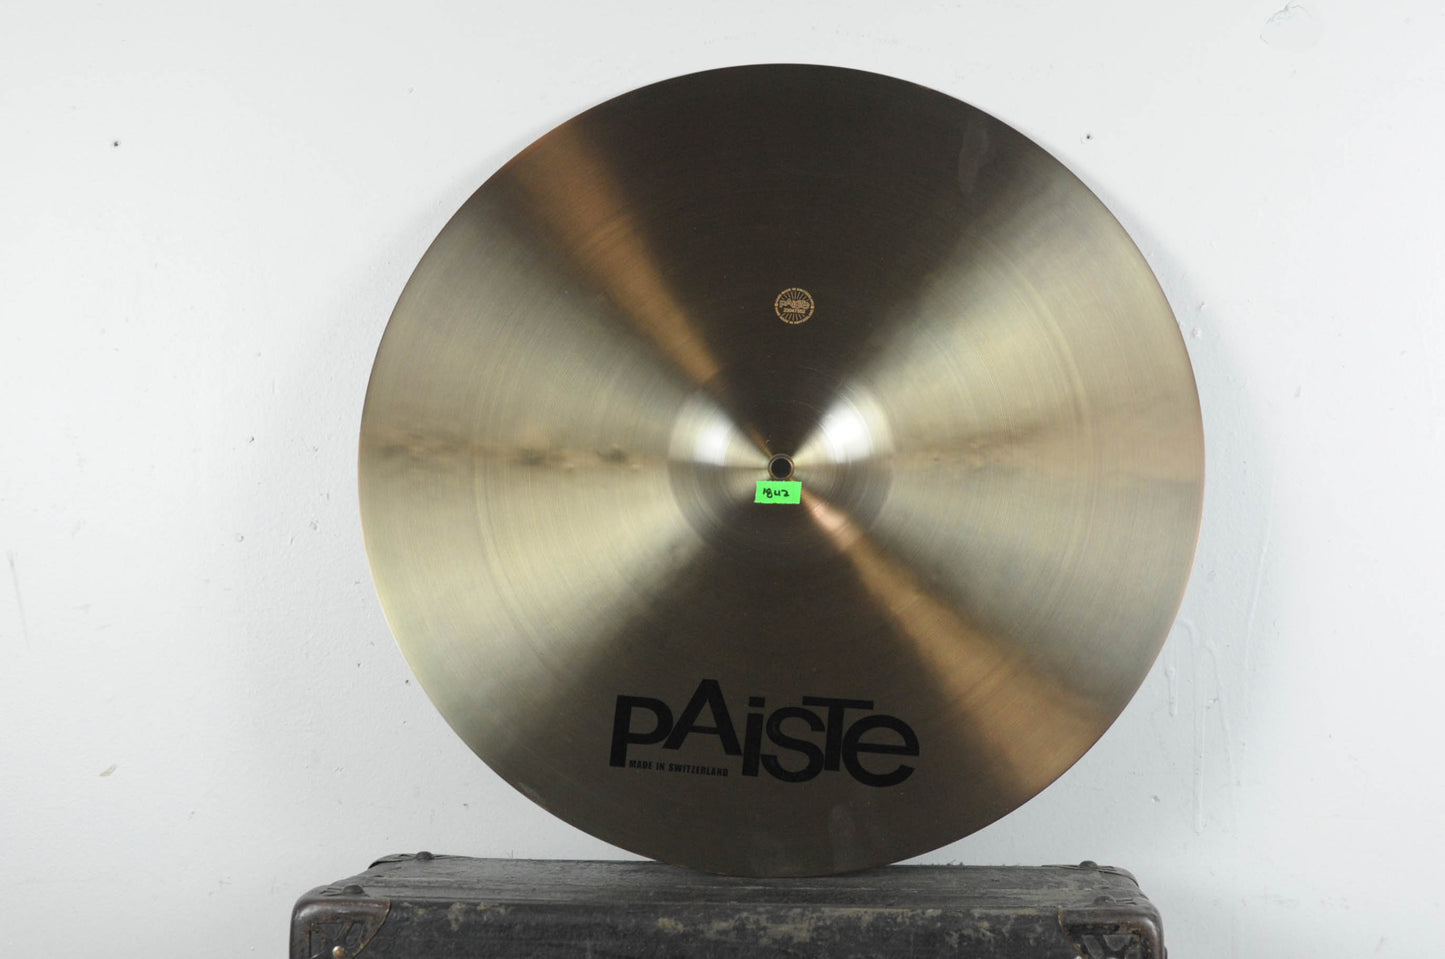 Paiste 20" Giant Beat Multi-Functional Cymbal 1842g